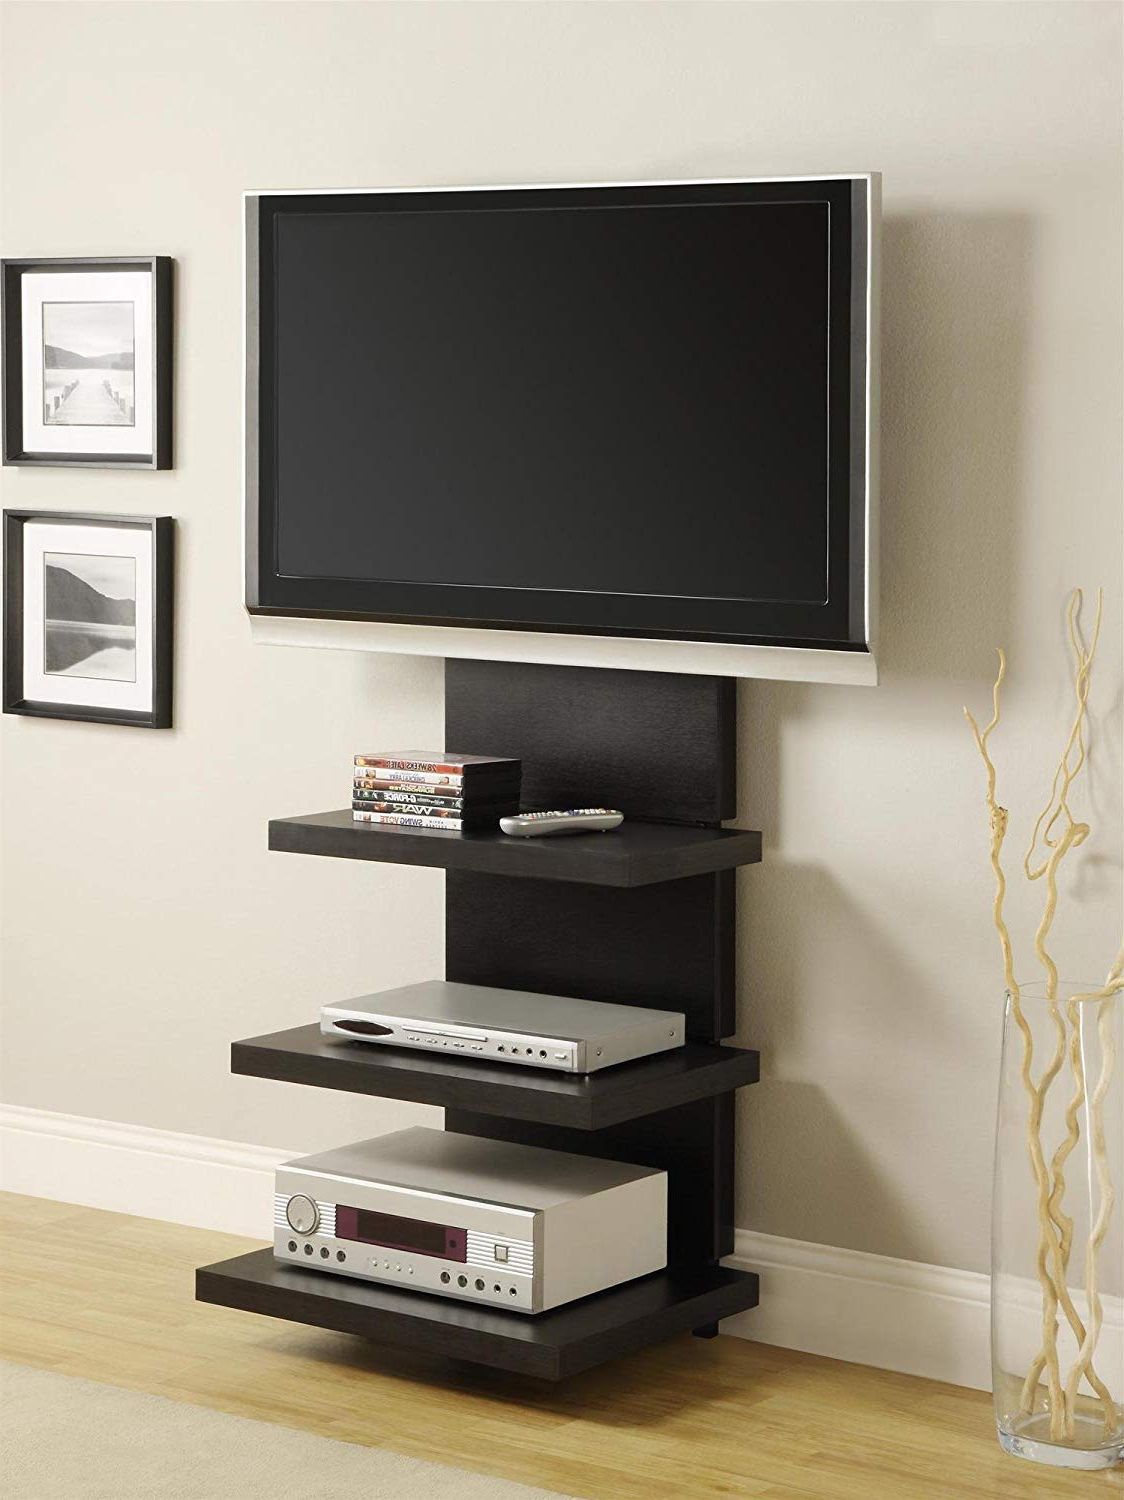 60 Best Diy Tv Stand Ideas For Your Room Interior With Regard To Diy Convertible Tv Stands And Bookcase (View 10 of 20)